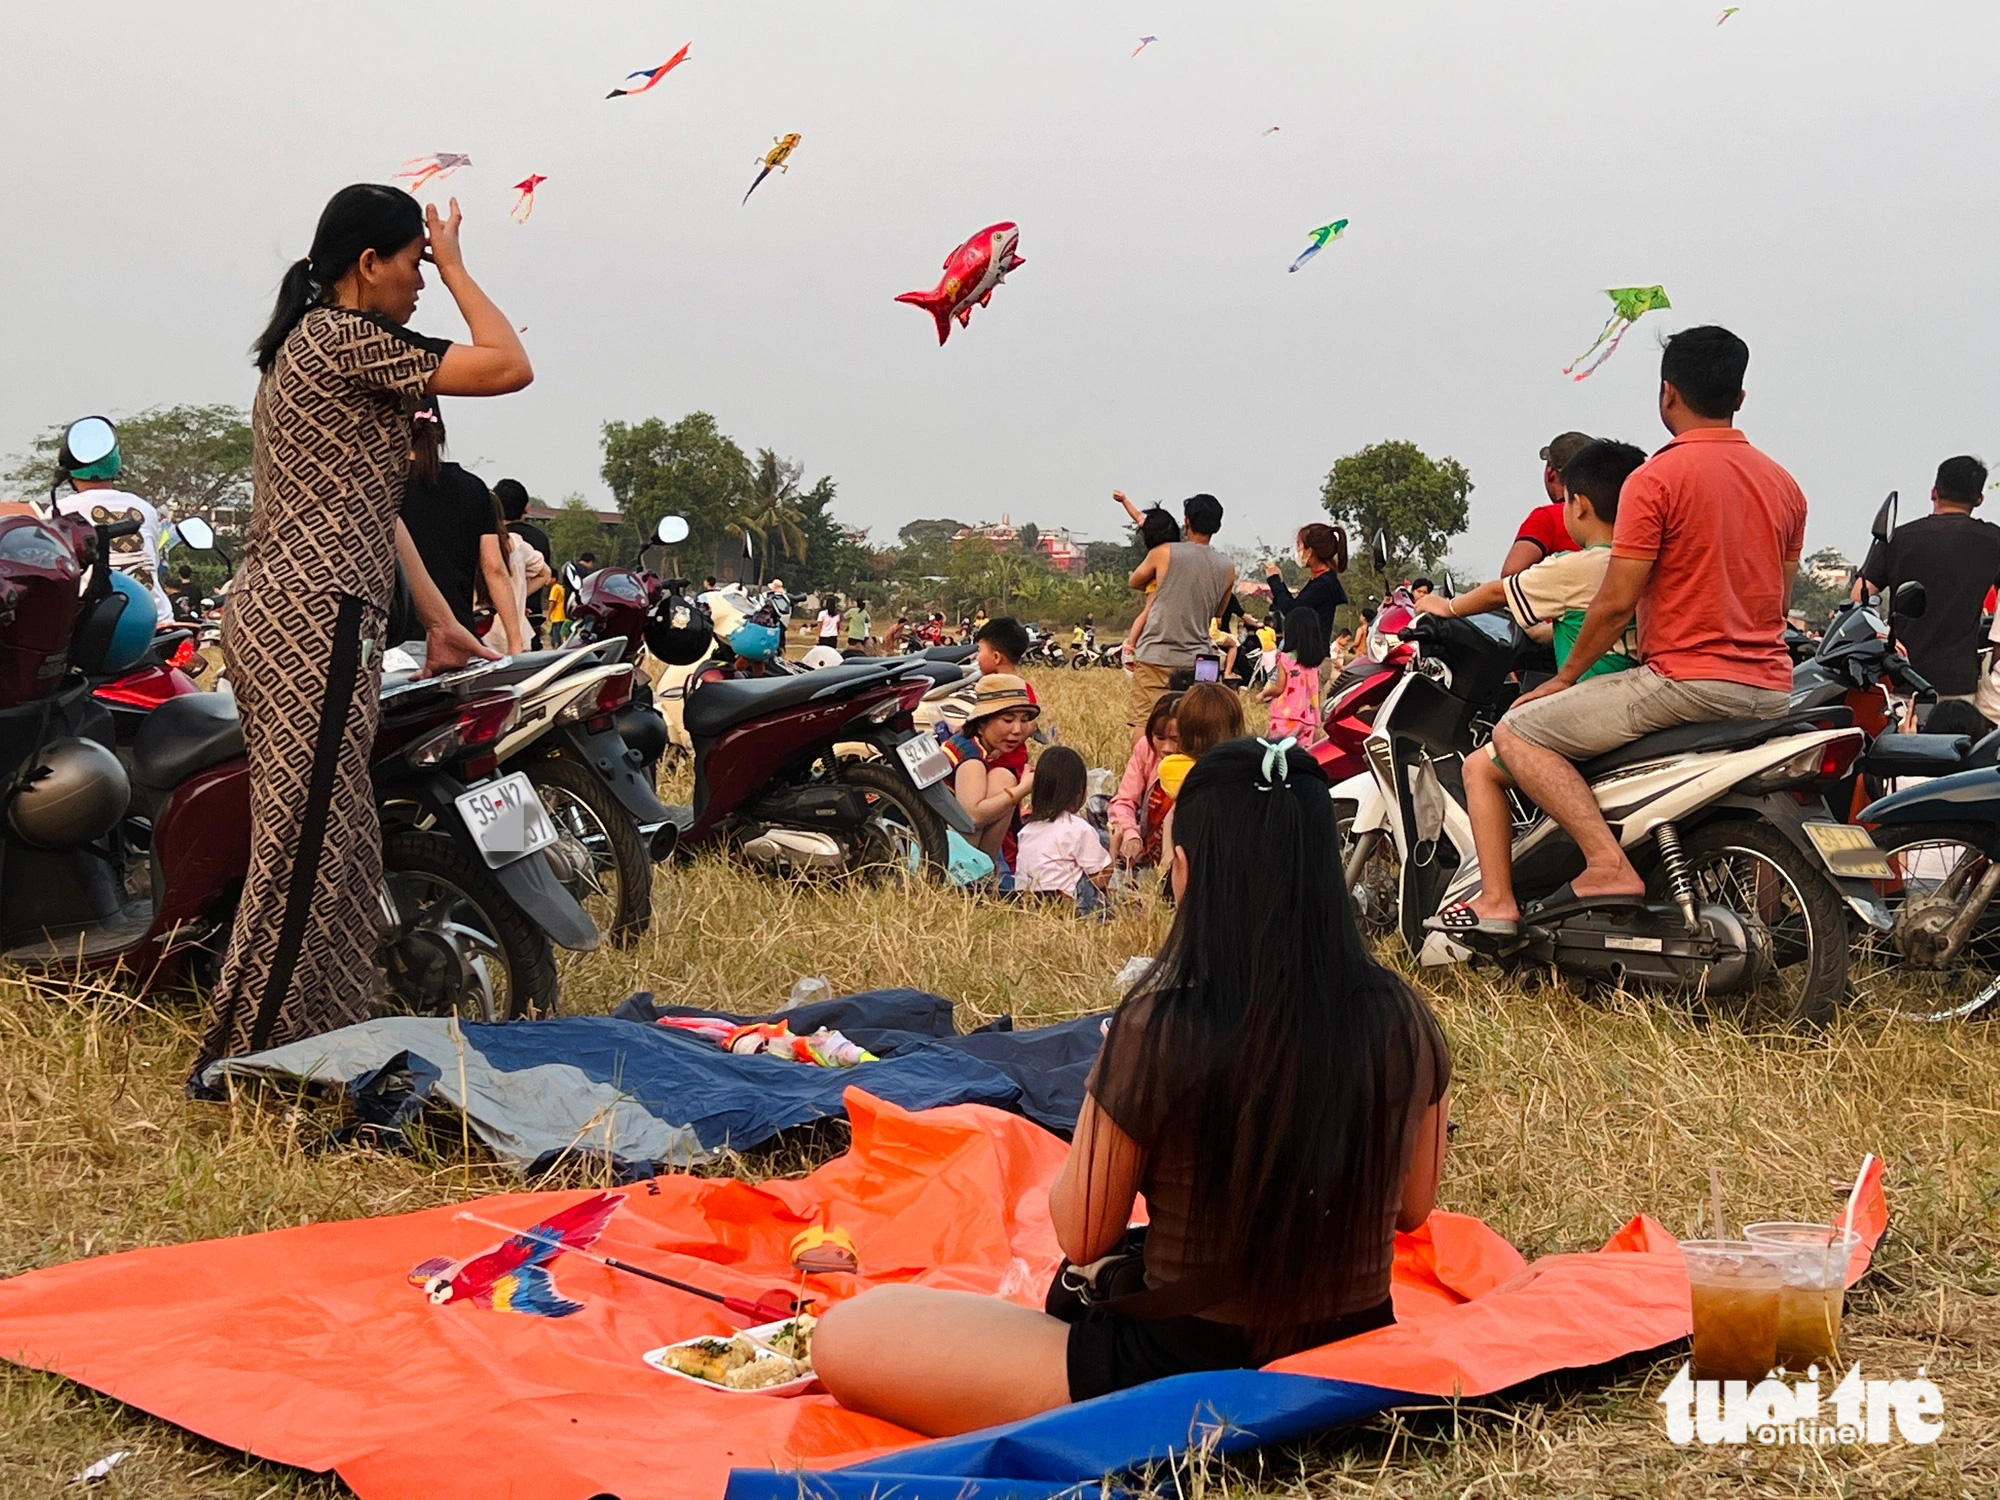 A family relaxes on a tarp and enjoys snacks at a kite-flying field along Nguyen Thi Danh Road in the suburban district of Hoc Mon, Ho Chi Minh City. Photo: Yen Trinh / Tuoi Tre